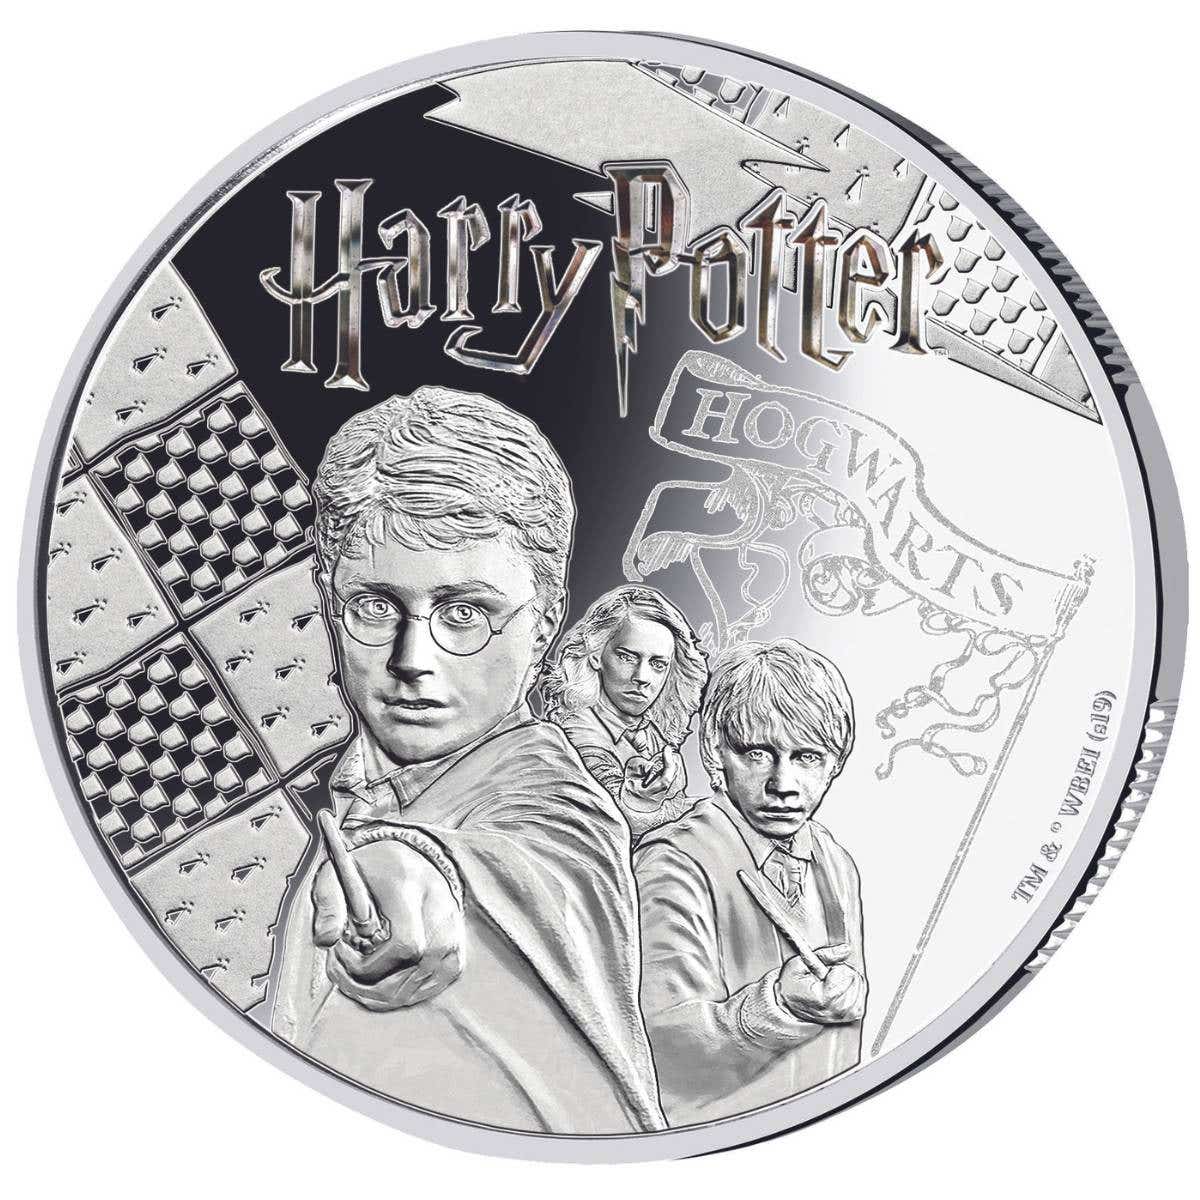 Harry Potter 2020 50c Silver-plated Coin + FREE Harry, Ron & Hermione Commemorative